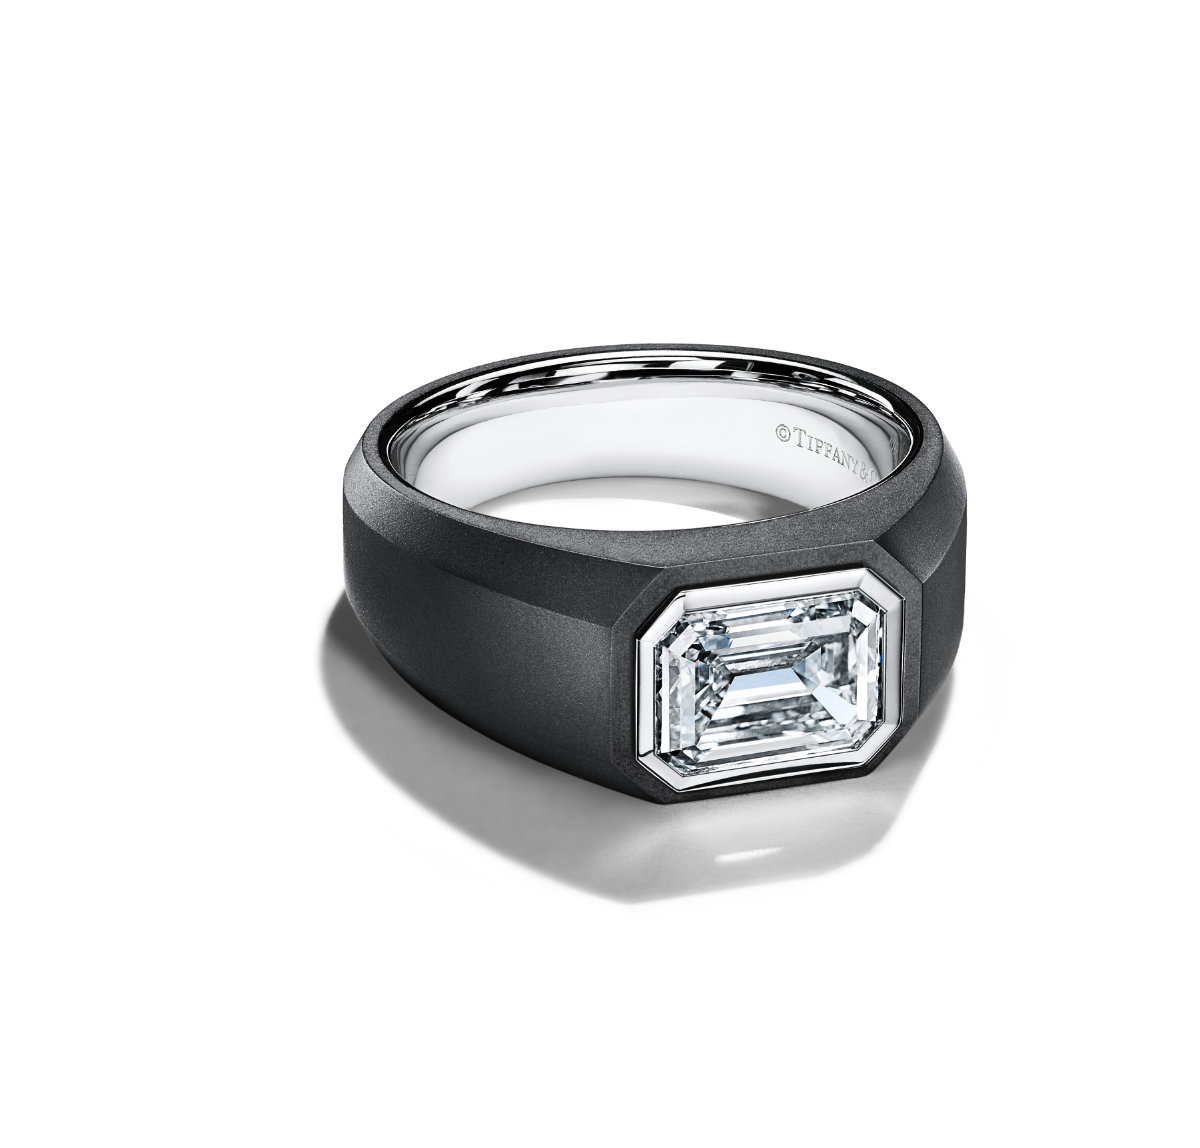 Tiffany & Co. Introduces Its First Men’s Engagement Ring: The Charles Tiffany Setting